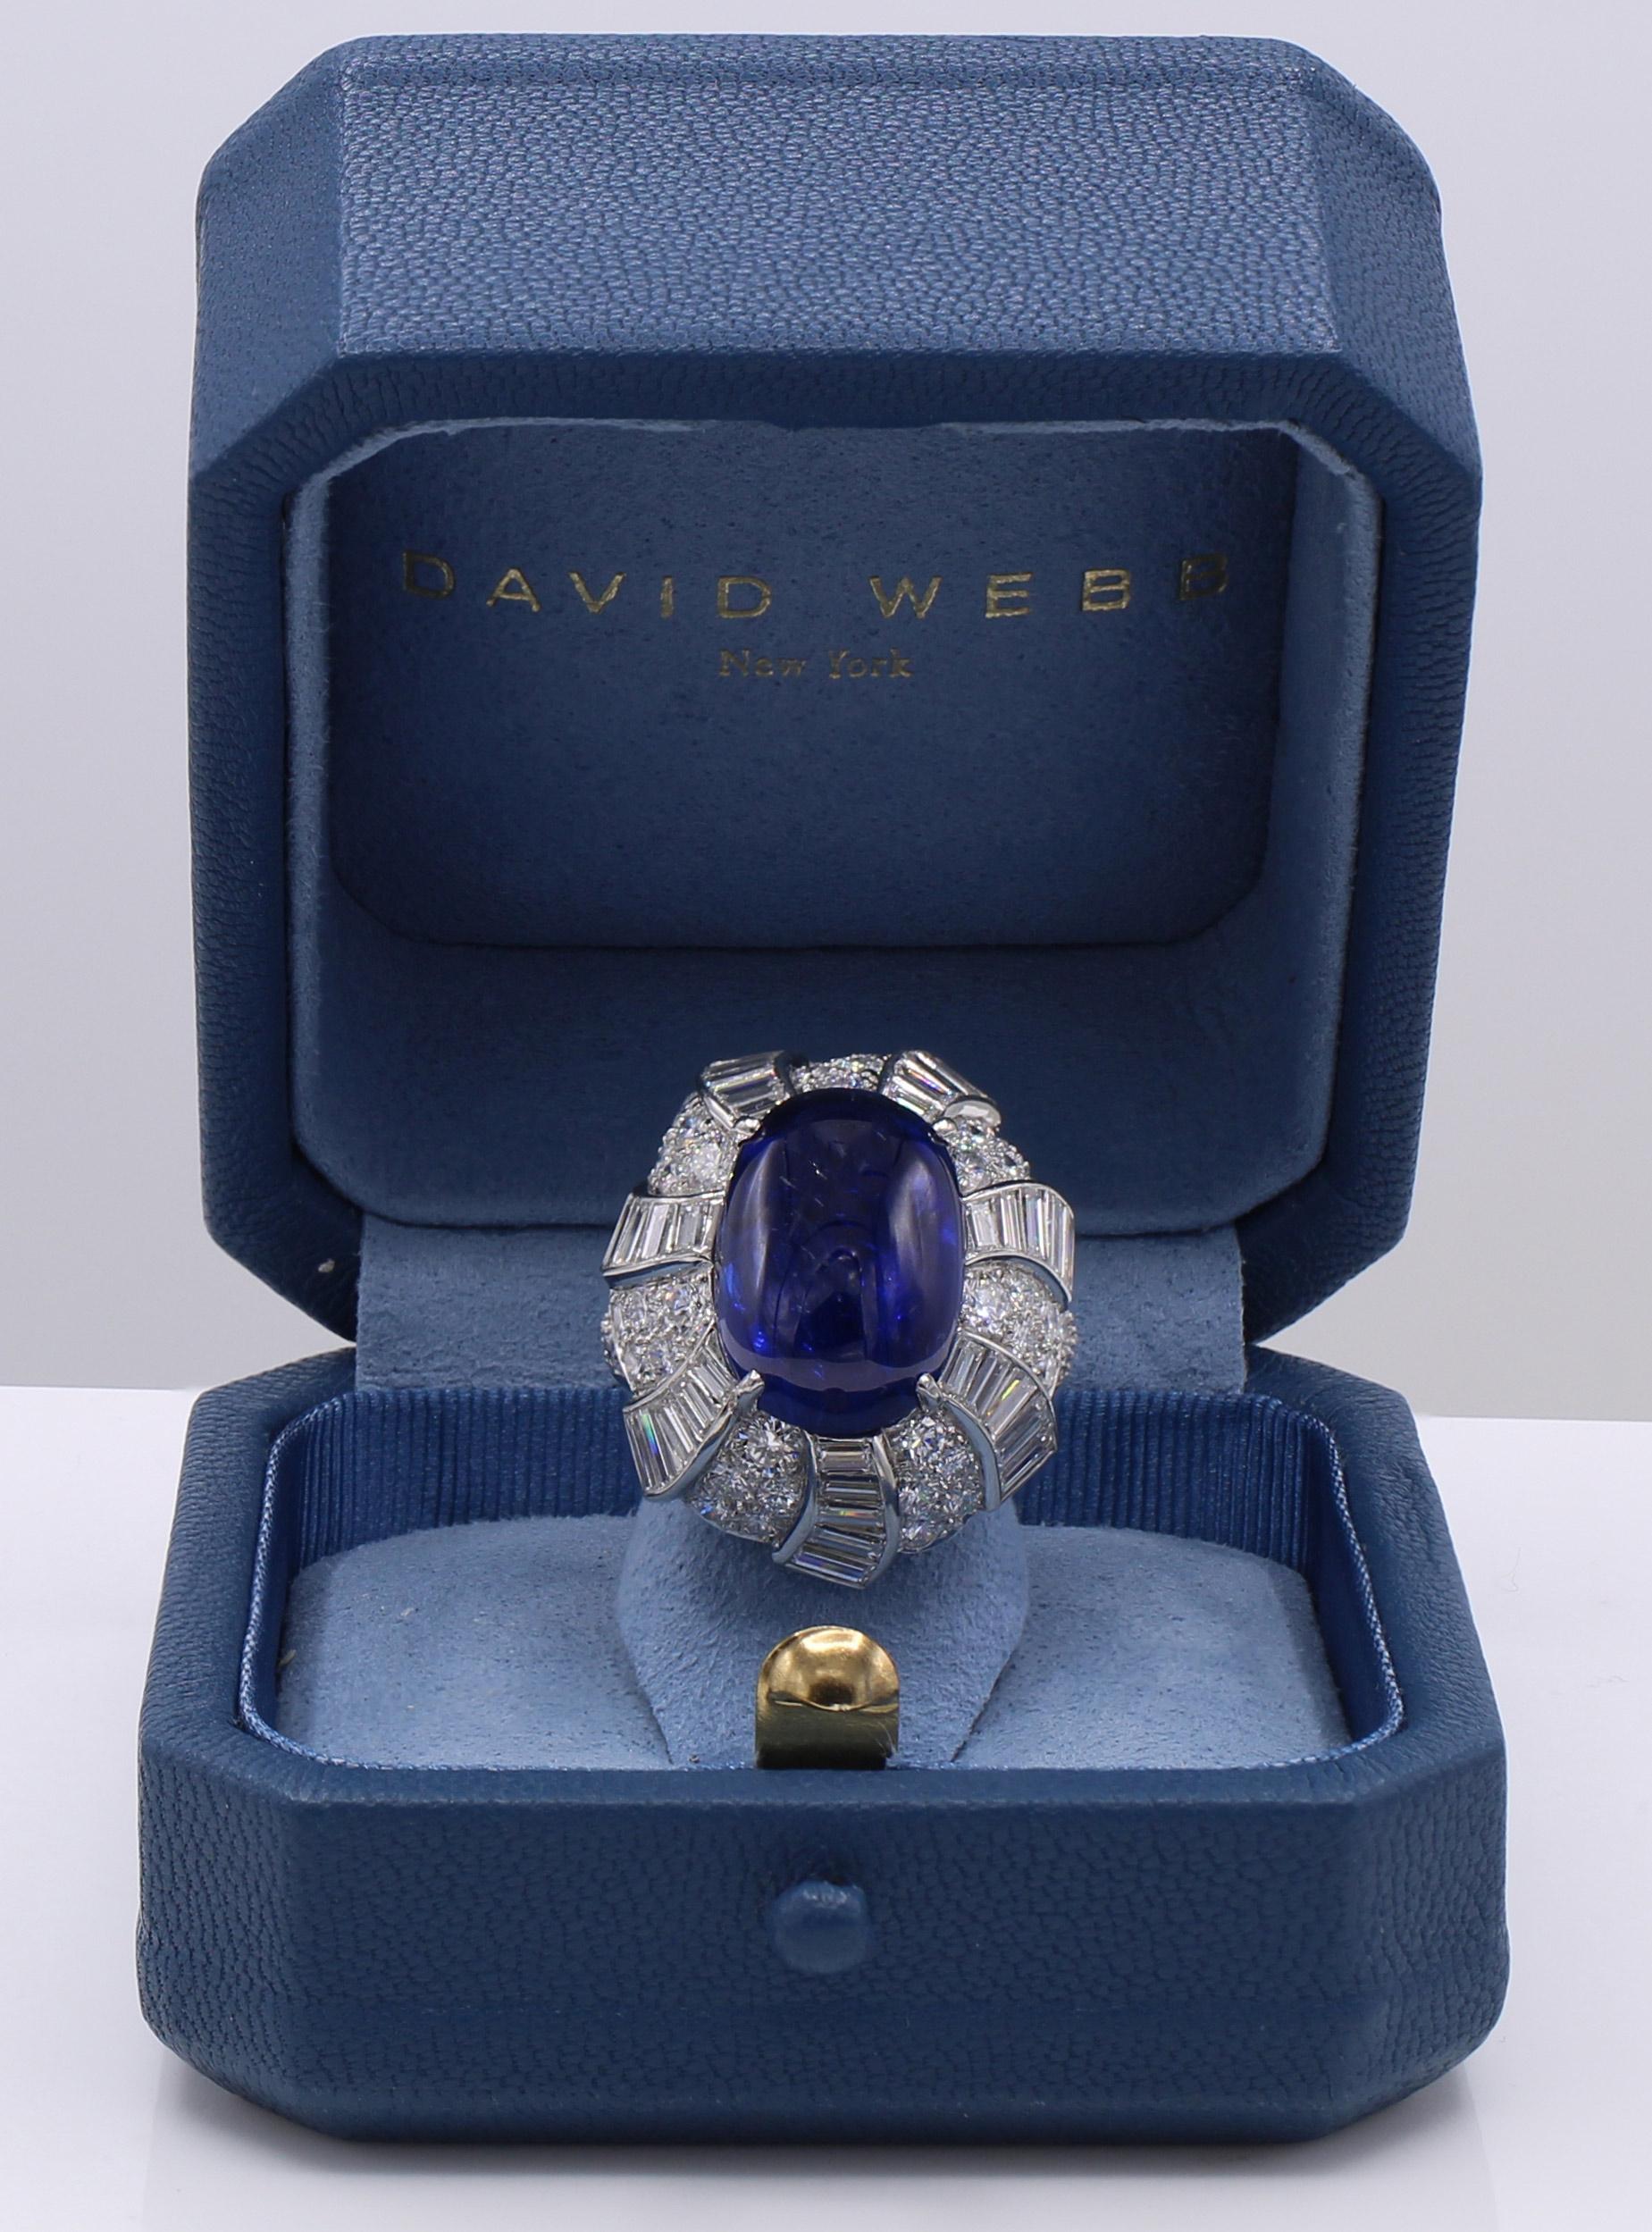 Beautifully designed and masterfully handcrafted by the renown and iconic American jeweler David Webb, this unique 1950s ring features a gorgeous amazingly saturated cabochon sapphire weighing 17.02 carats. The sapphire is accompanied by two